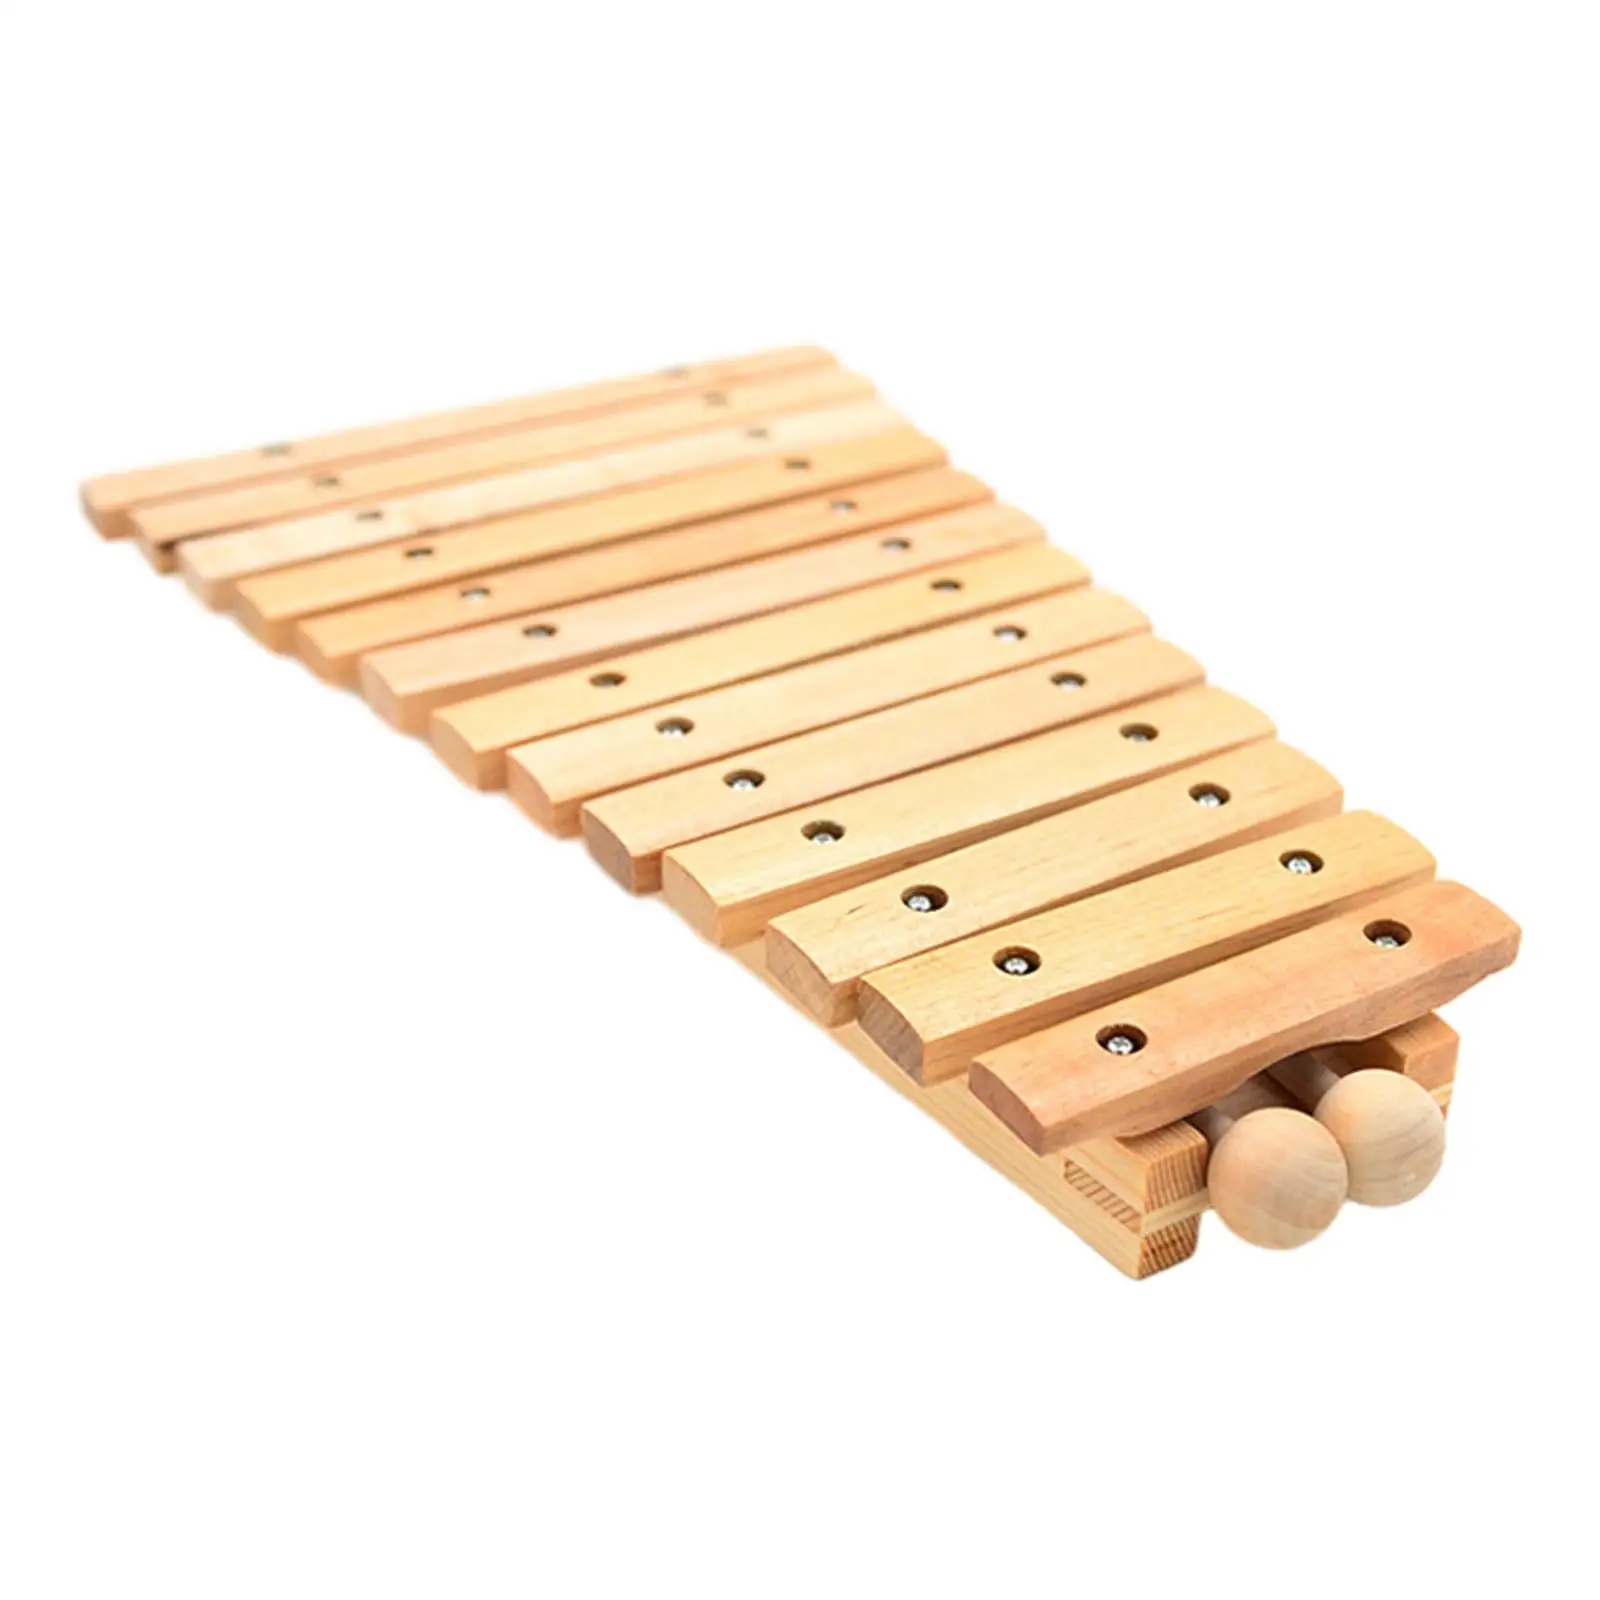 13 Note Xylophone Hand Knock Piano Toy Wood Hand Percussion Xylophone for Kids Montessori for Event School Orchestras Concert